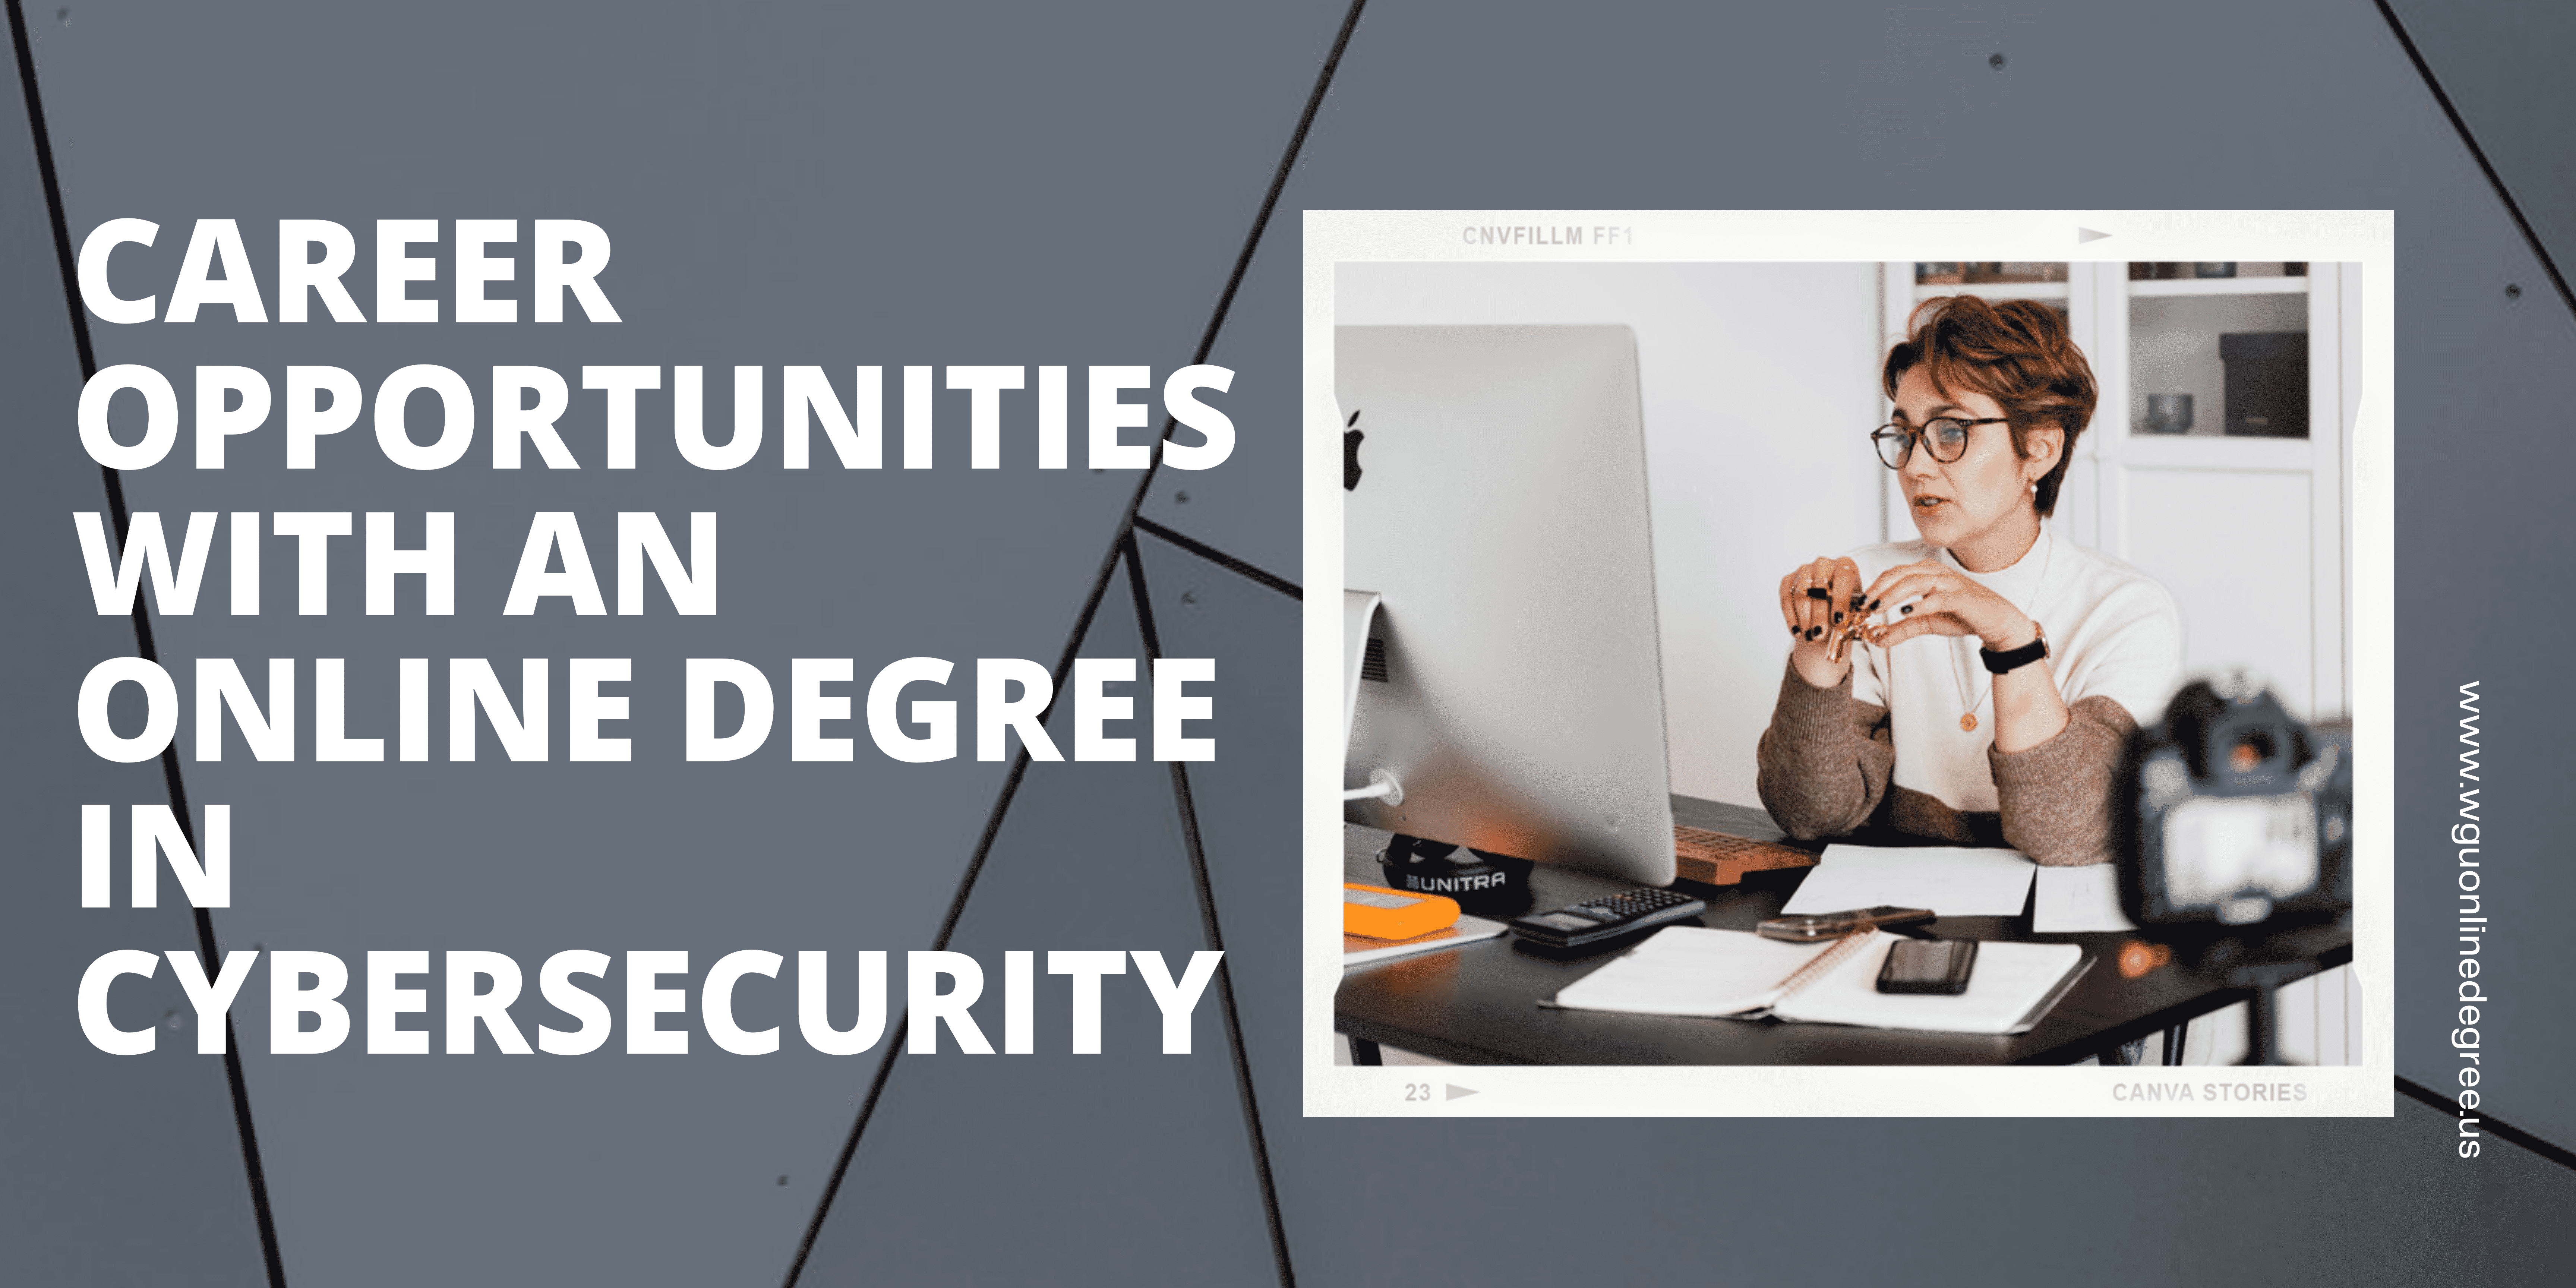 Career Opportunities with an Online Degree in Cybersecurity